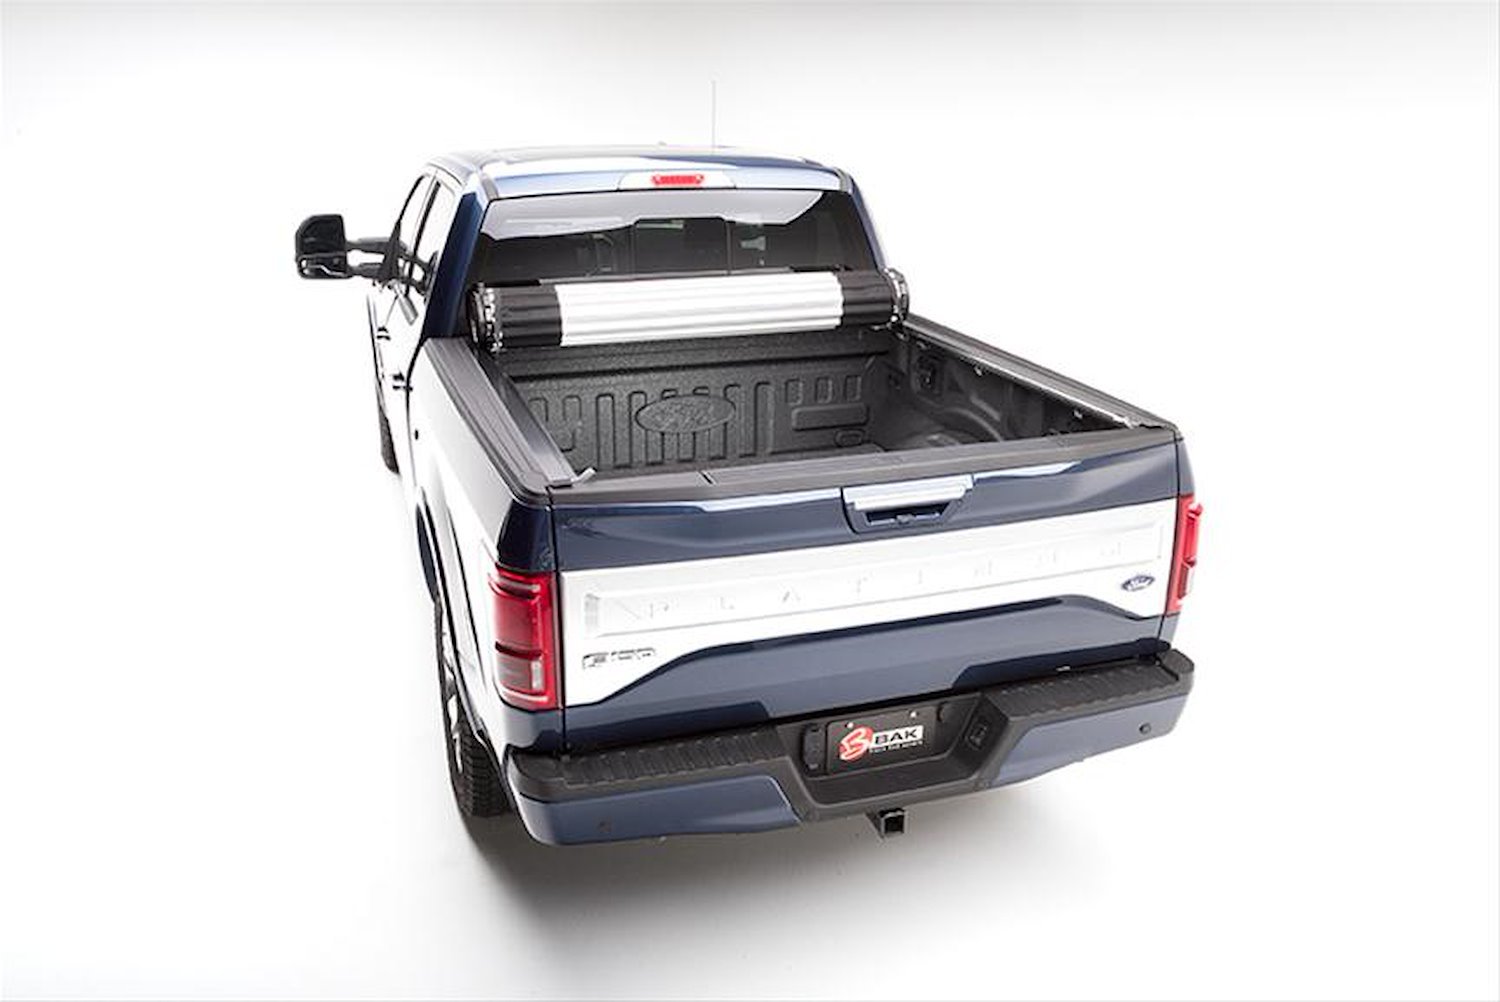 39329 Revolver X2 for 15-20 Ford F150 5.7 ft. Bed, Roll-Up Hard Cover Style [Black Finish]